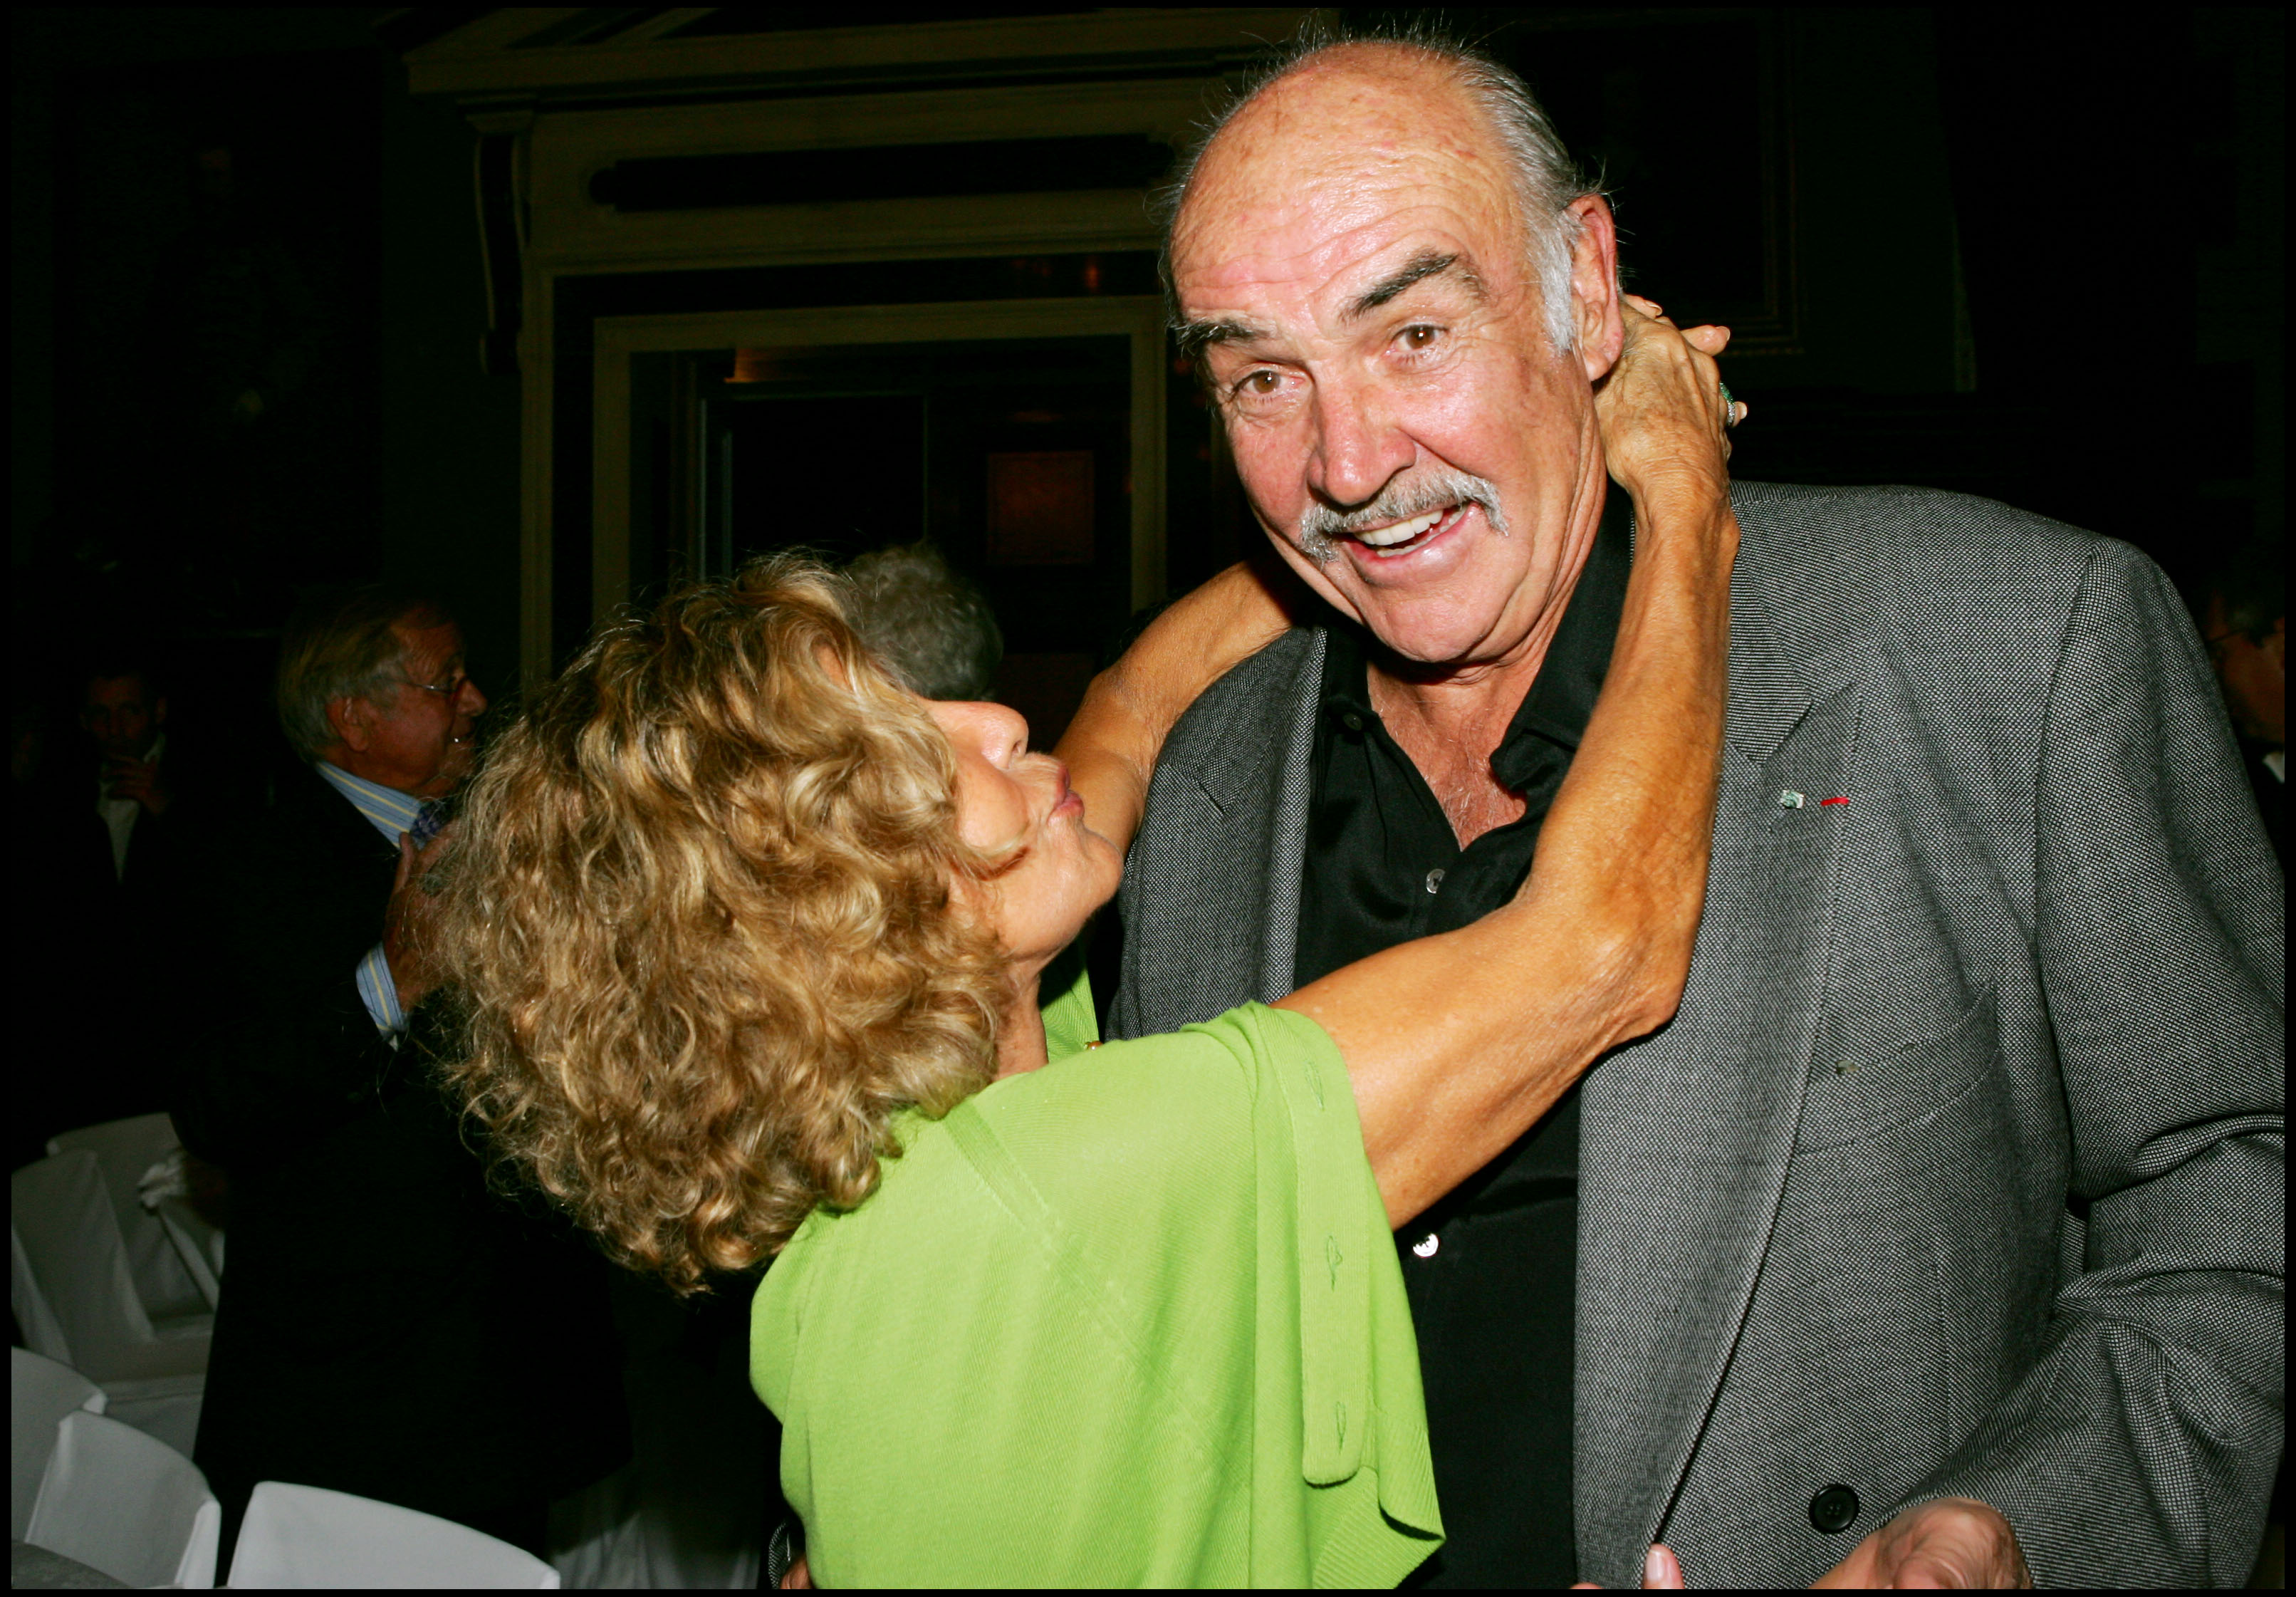 Sean Connery and Micheline Roquebrune at their 30 year anniversary party at Chateau De Groussay on June 1, 2005 | Source: Getty Images